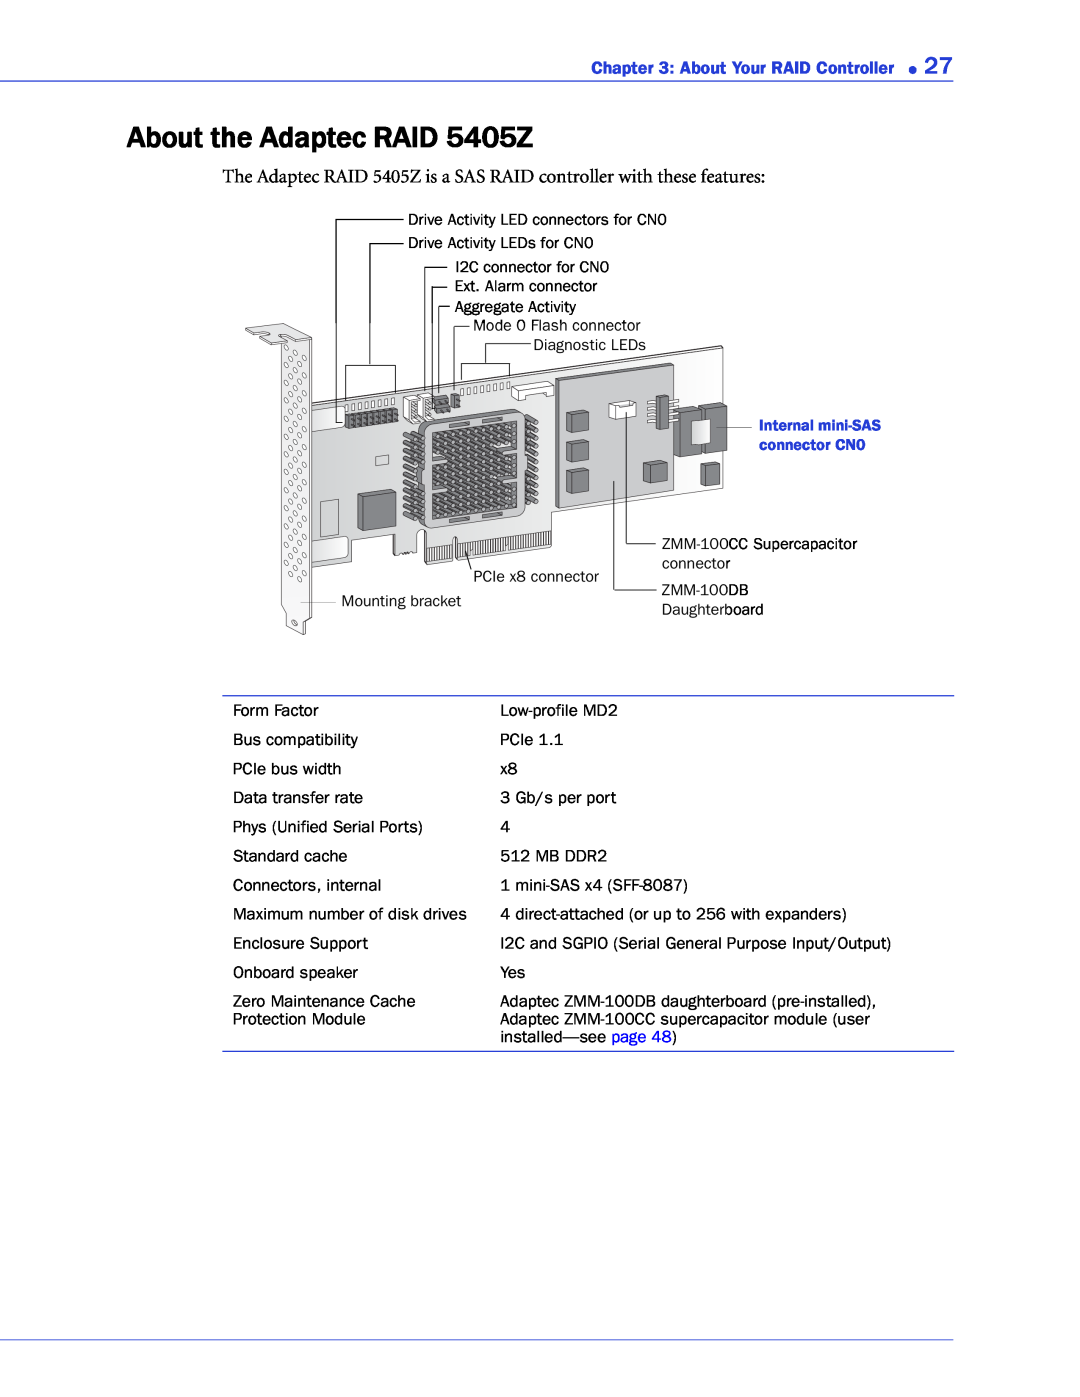 Adaptec 2268300R manual About the Adaptec RAID 5405Z, The Adaptec RAID 5405Z is a SAS RAID controller with these features 